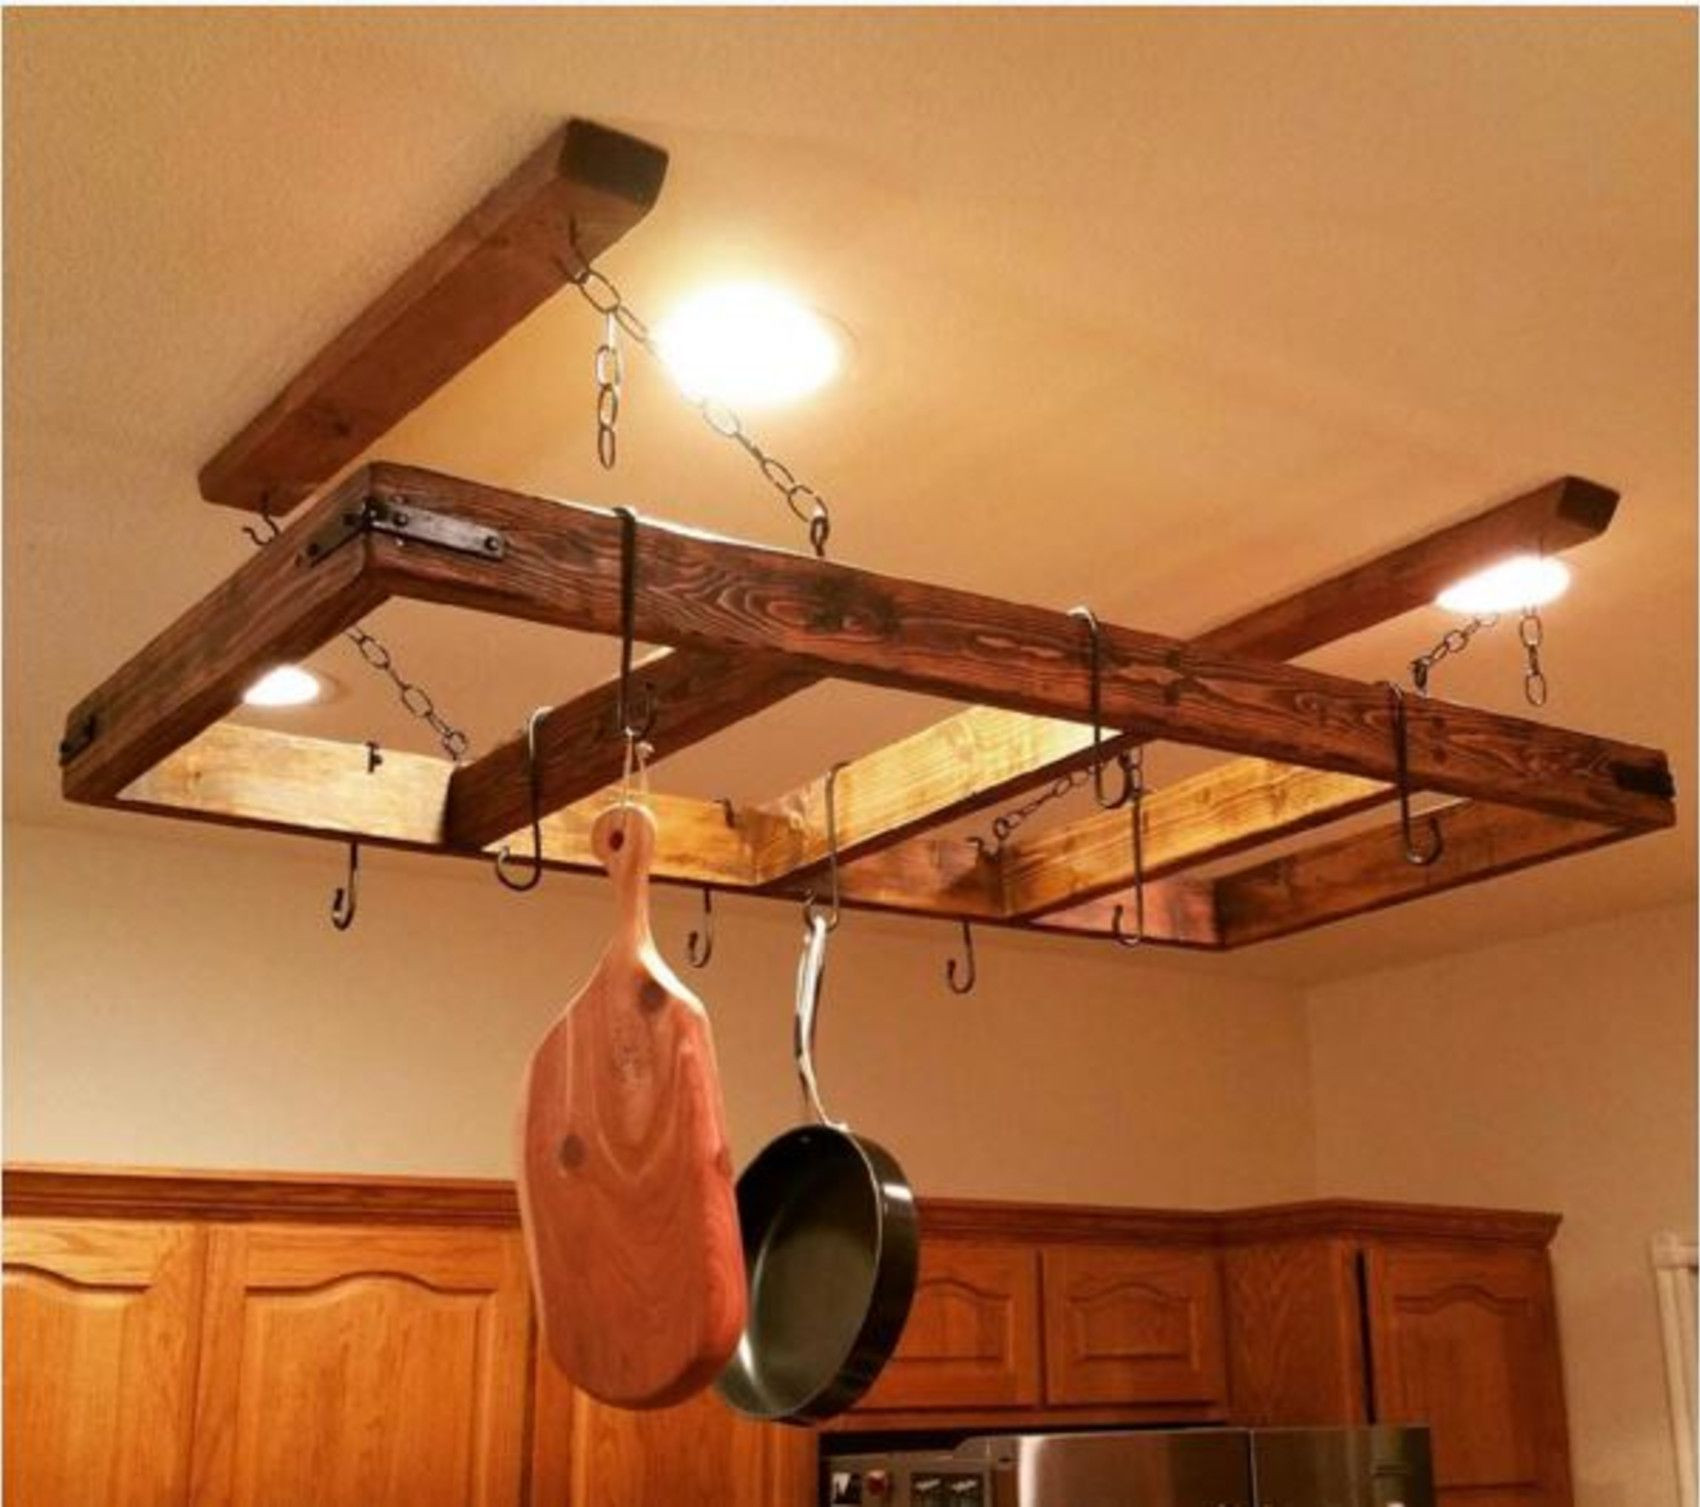 DIY Hanging Pan Rack
 12 DIY pot rack projects to save space in your kitchen